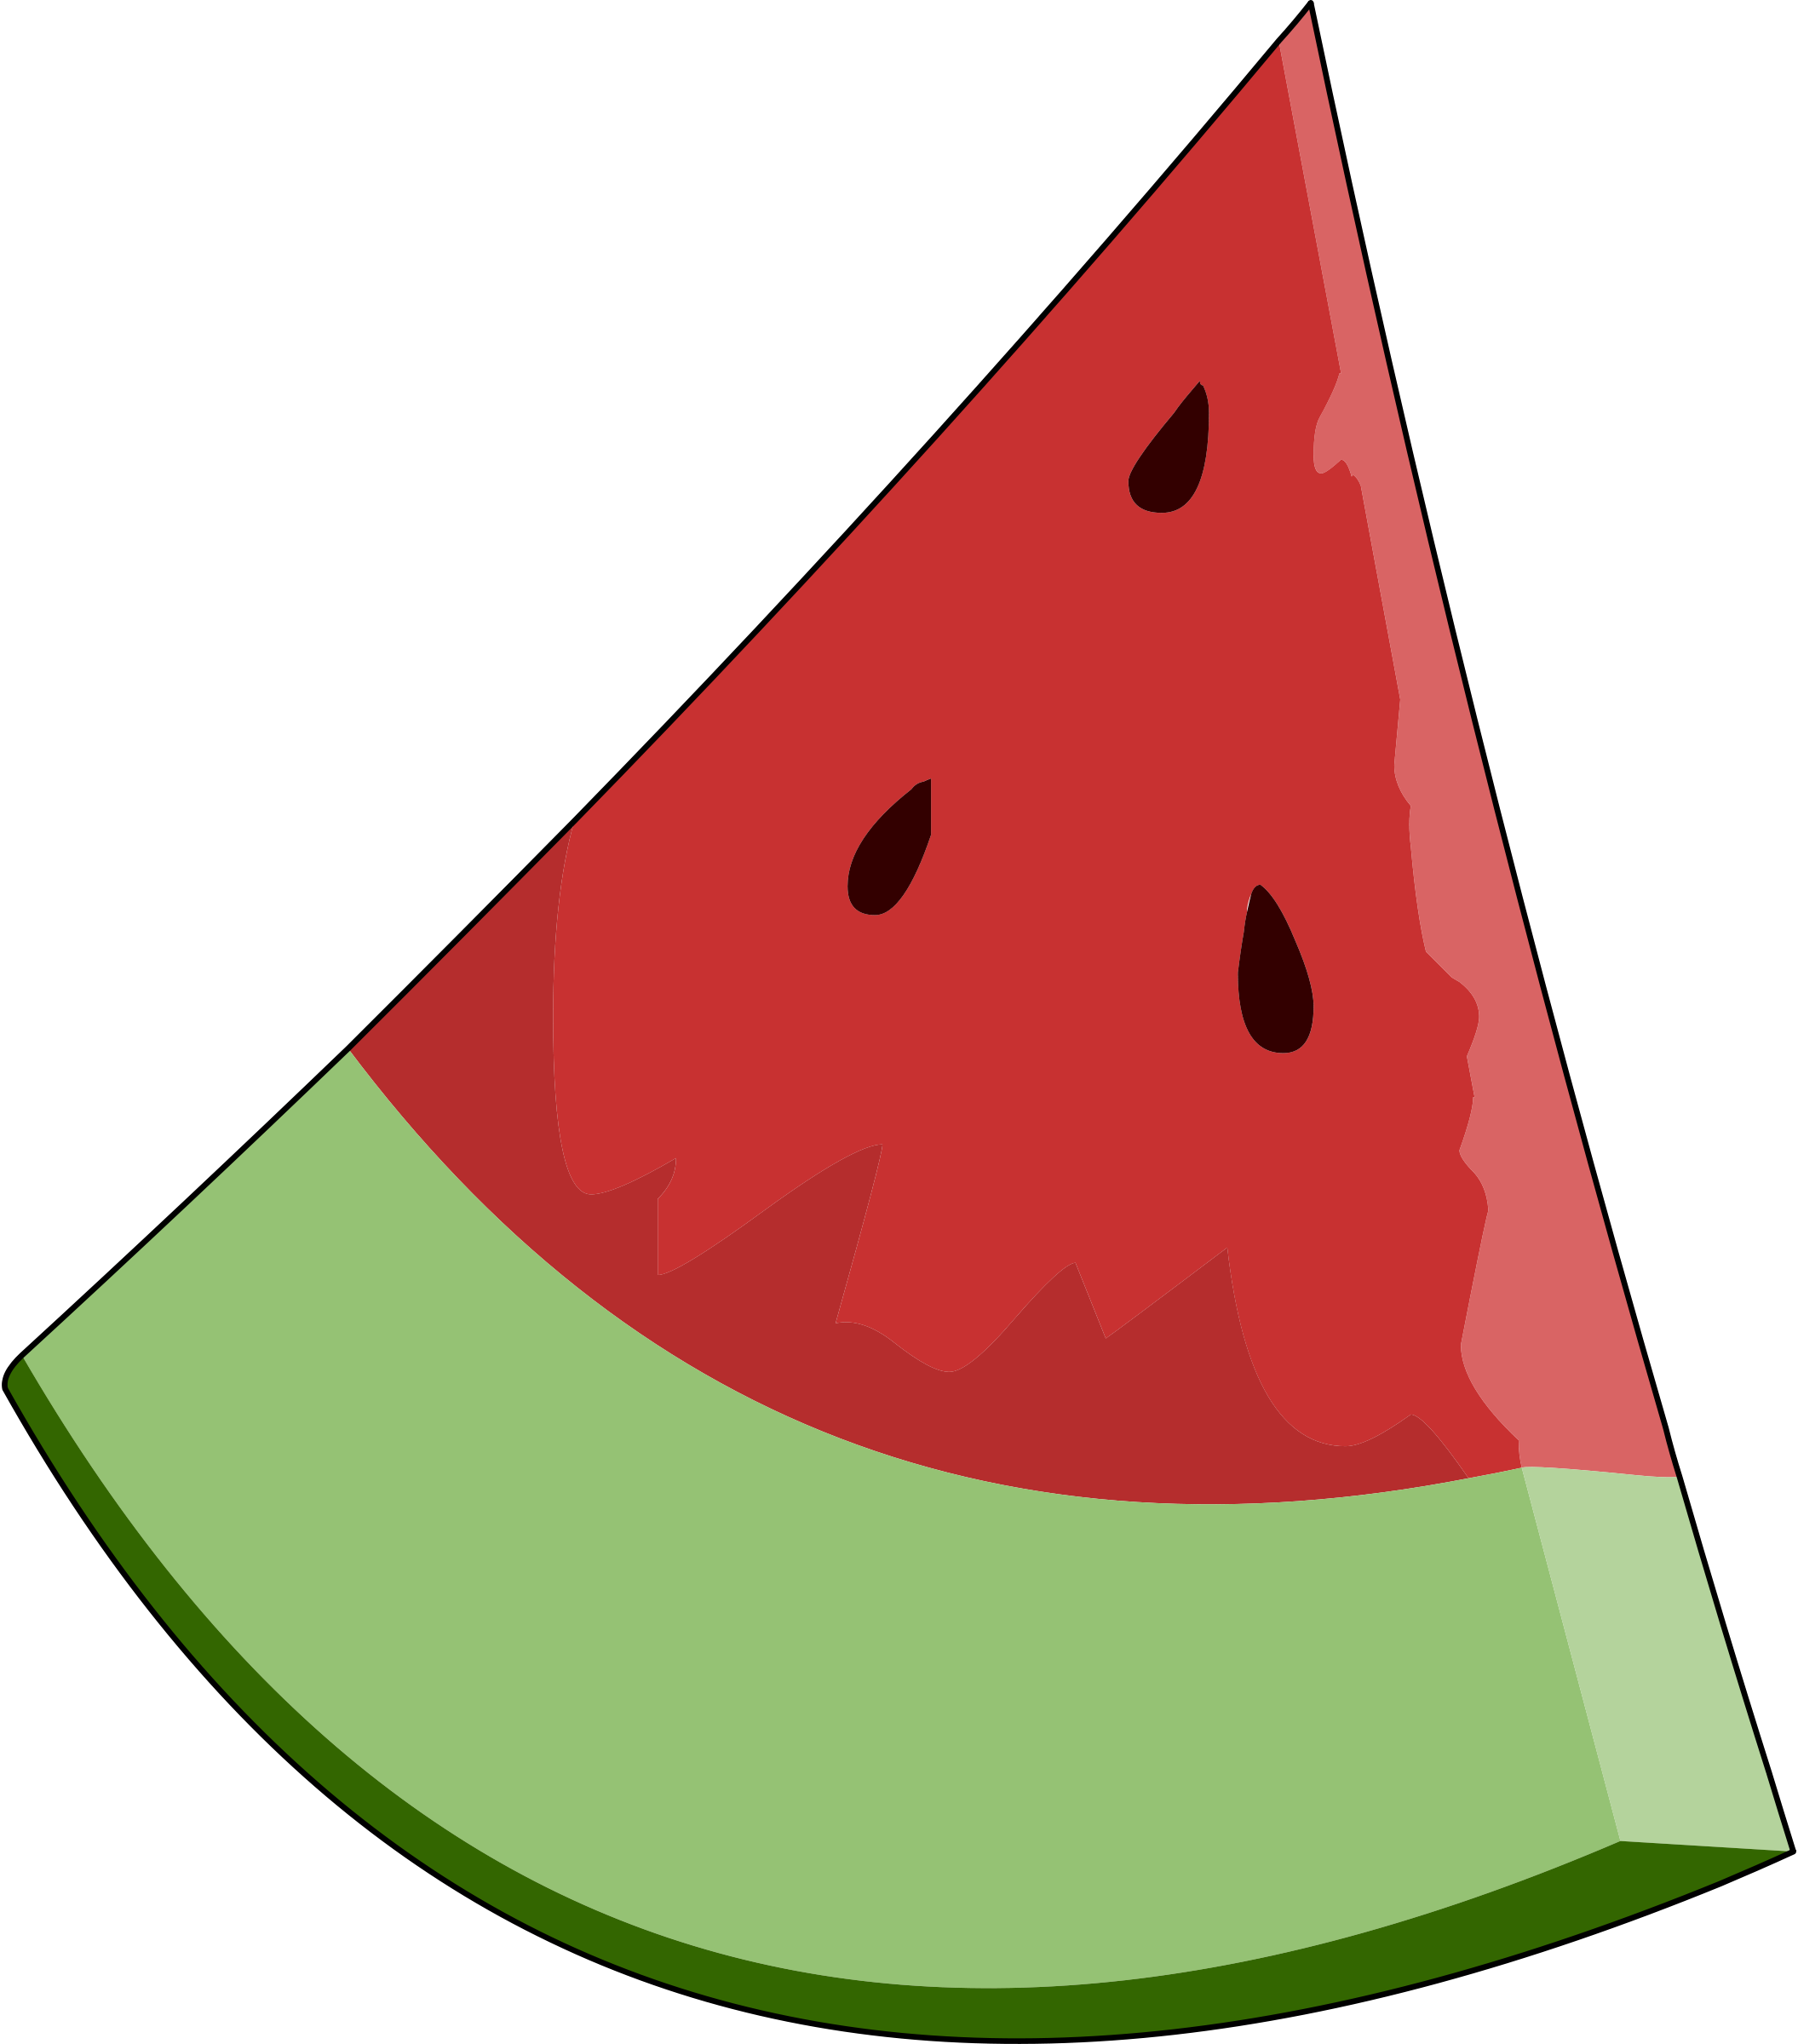 Watermelon clipart printable. Cheese triangle objects pencil